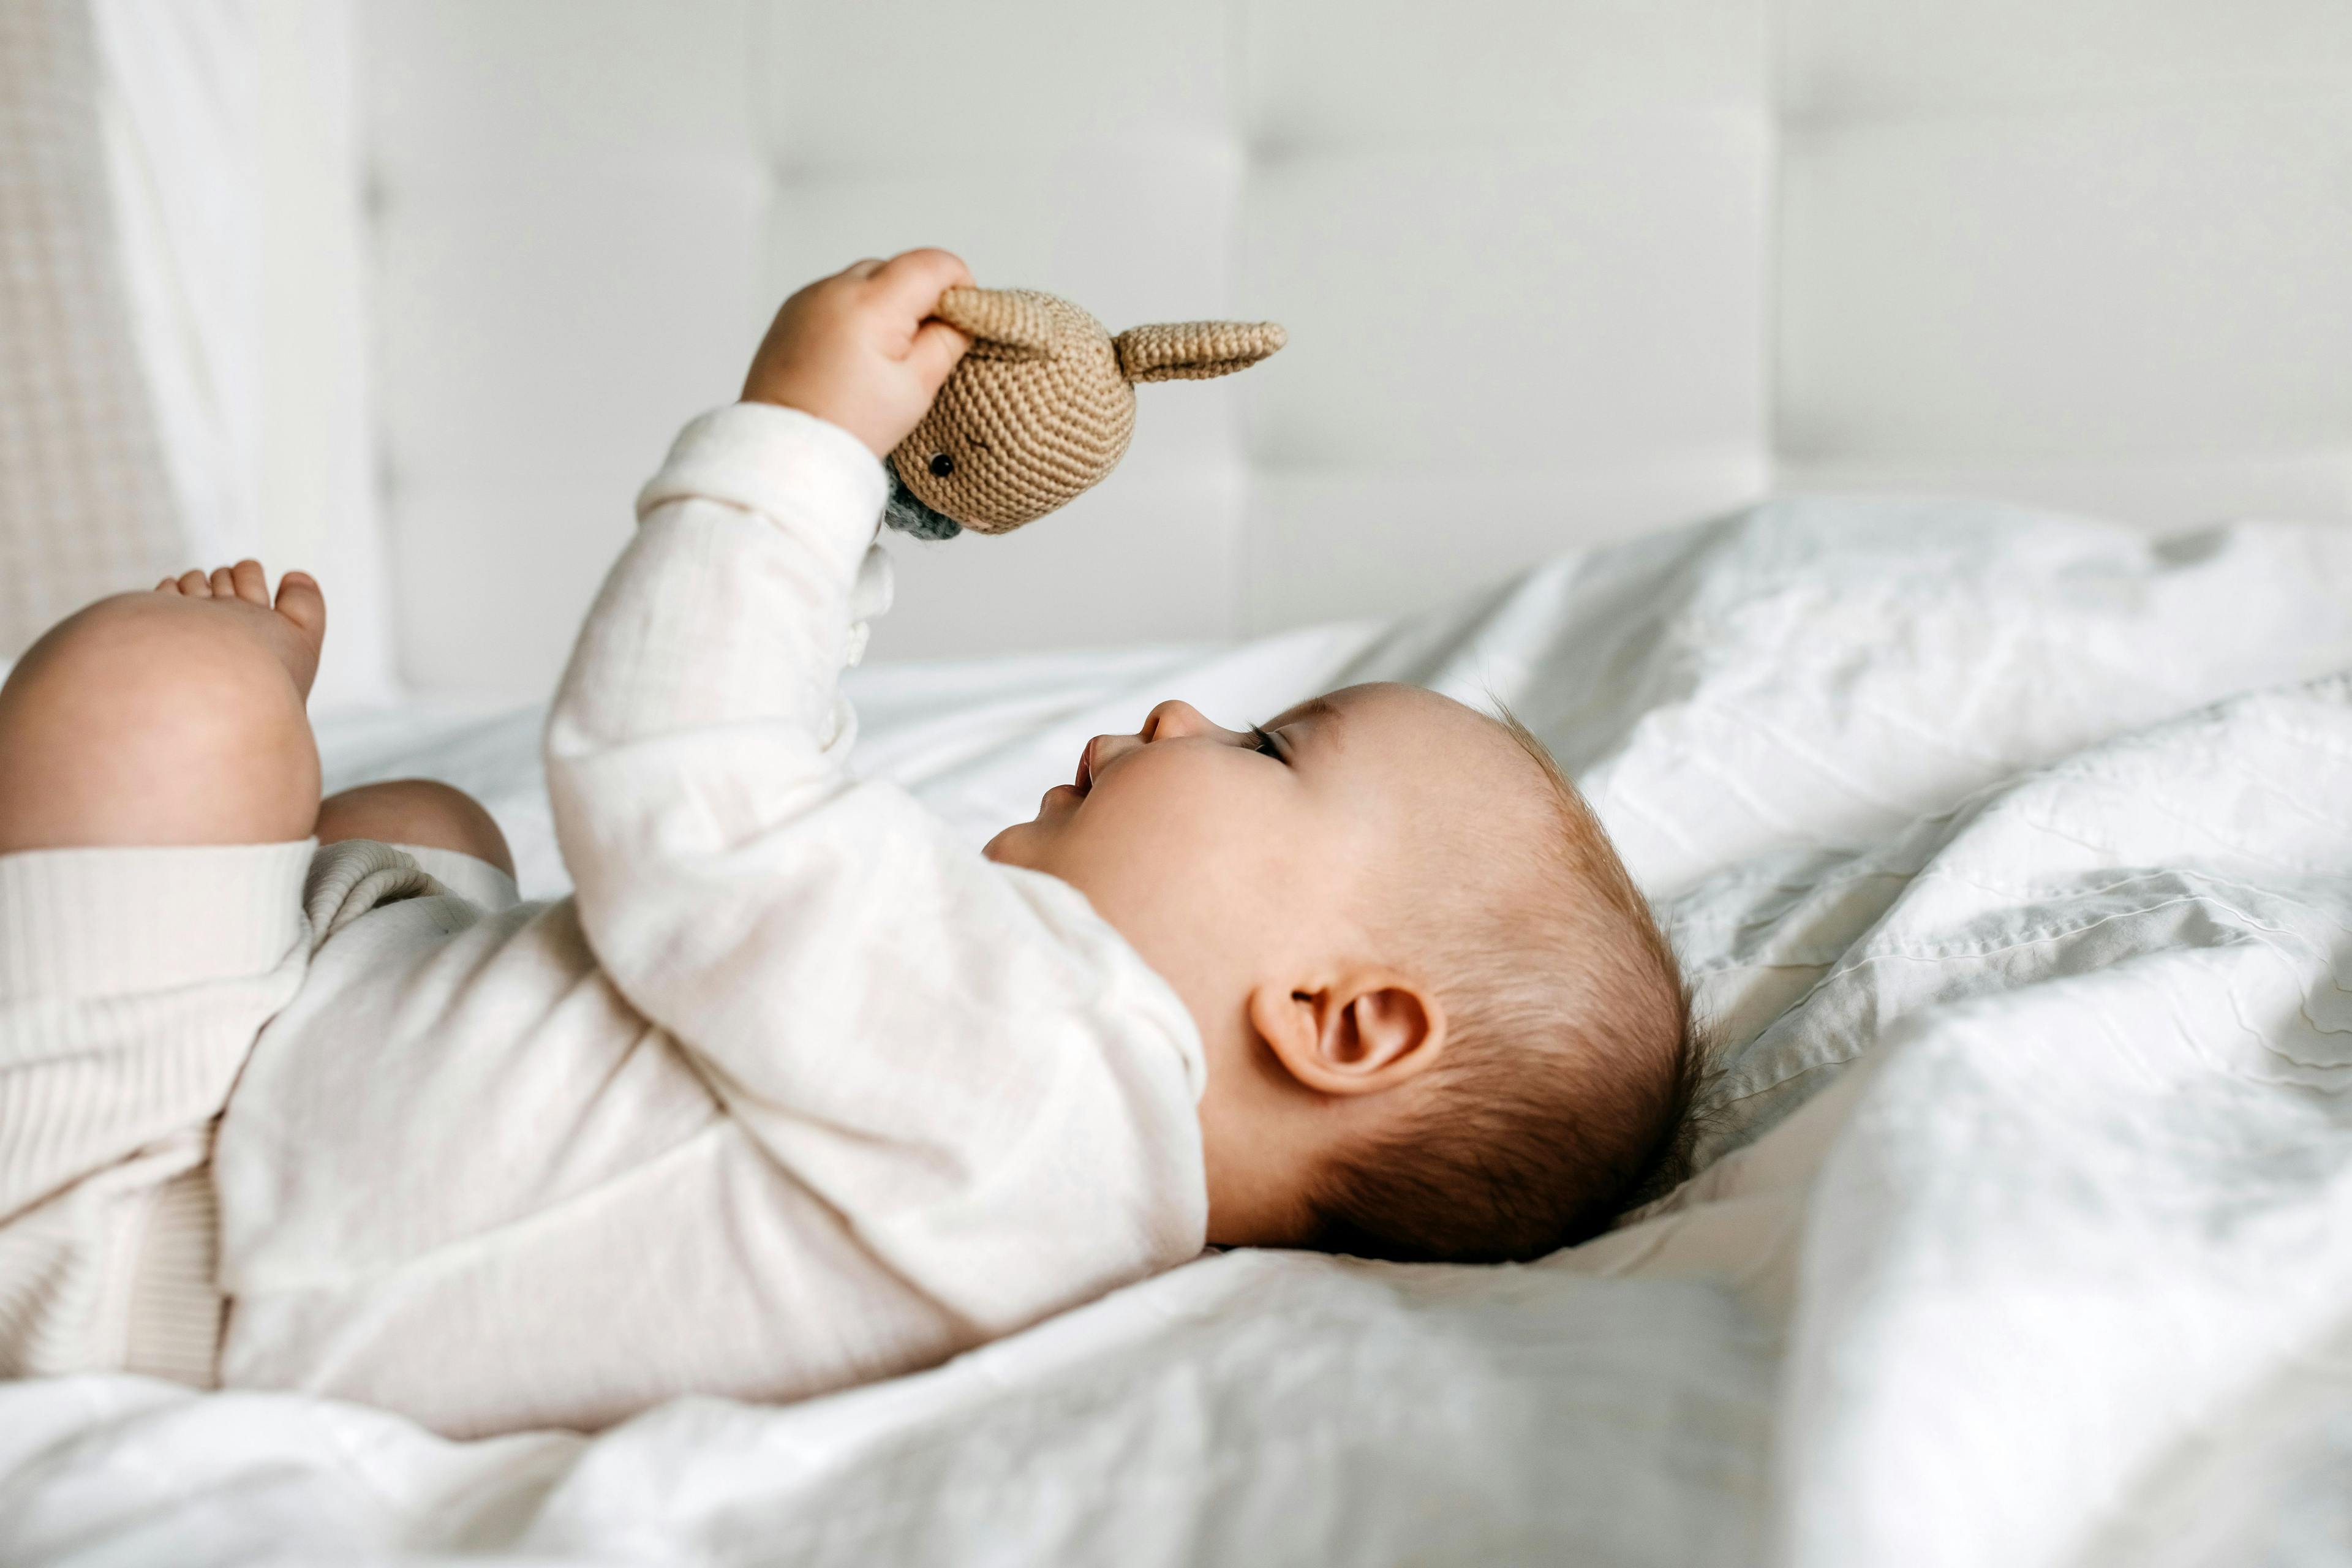 Five months old baby lying on bed, playing with a crocheted bunny toy: © Bostan Natalia - stock.adobe.com